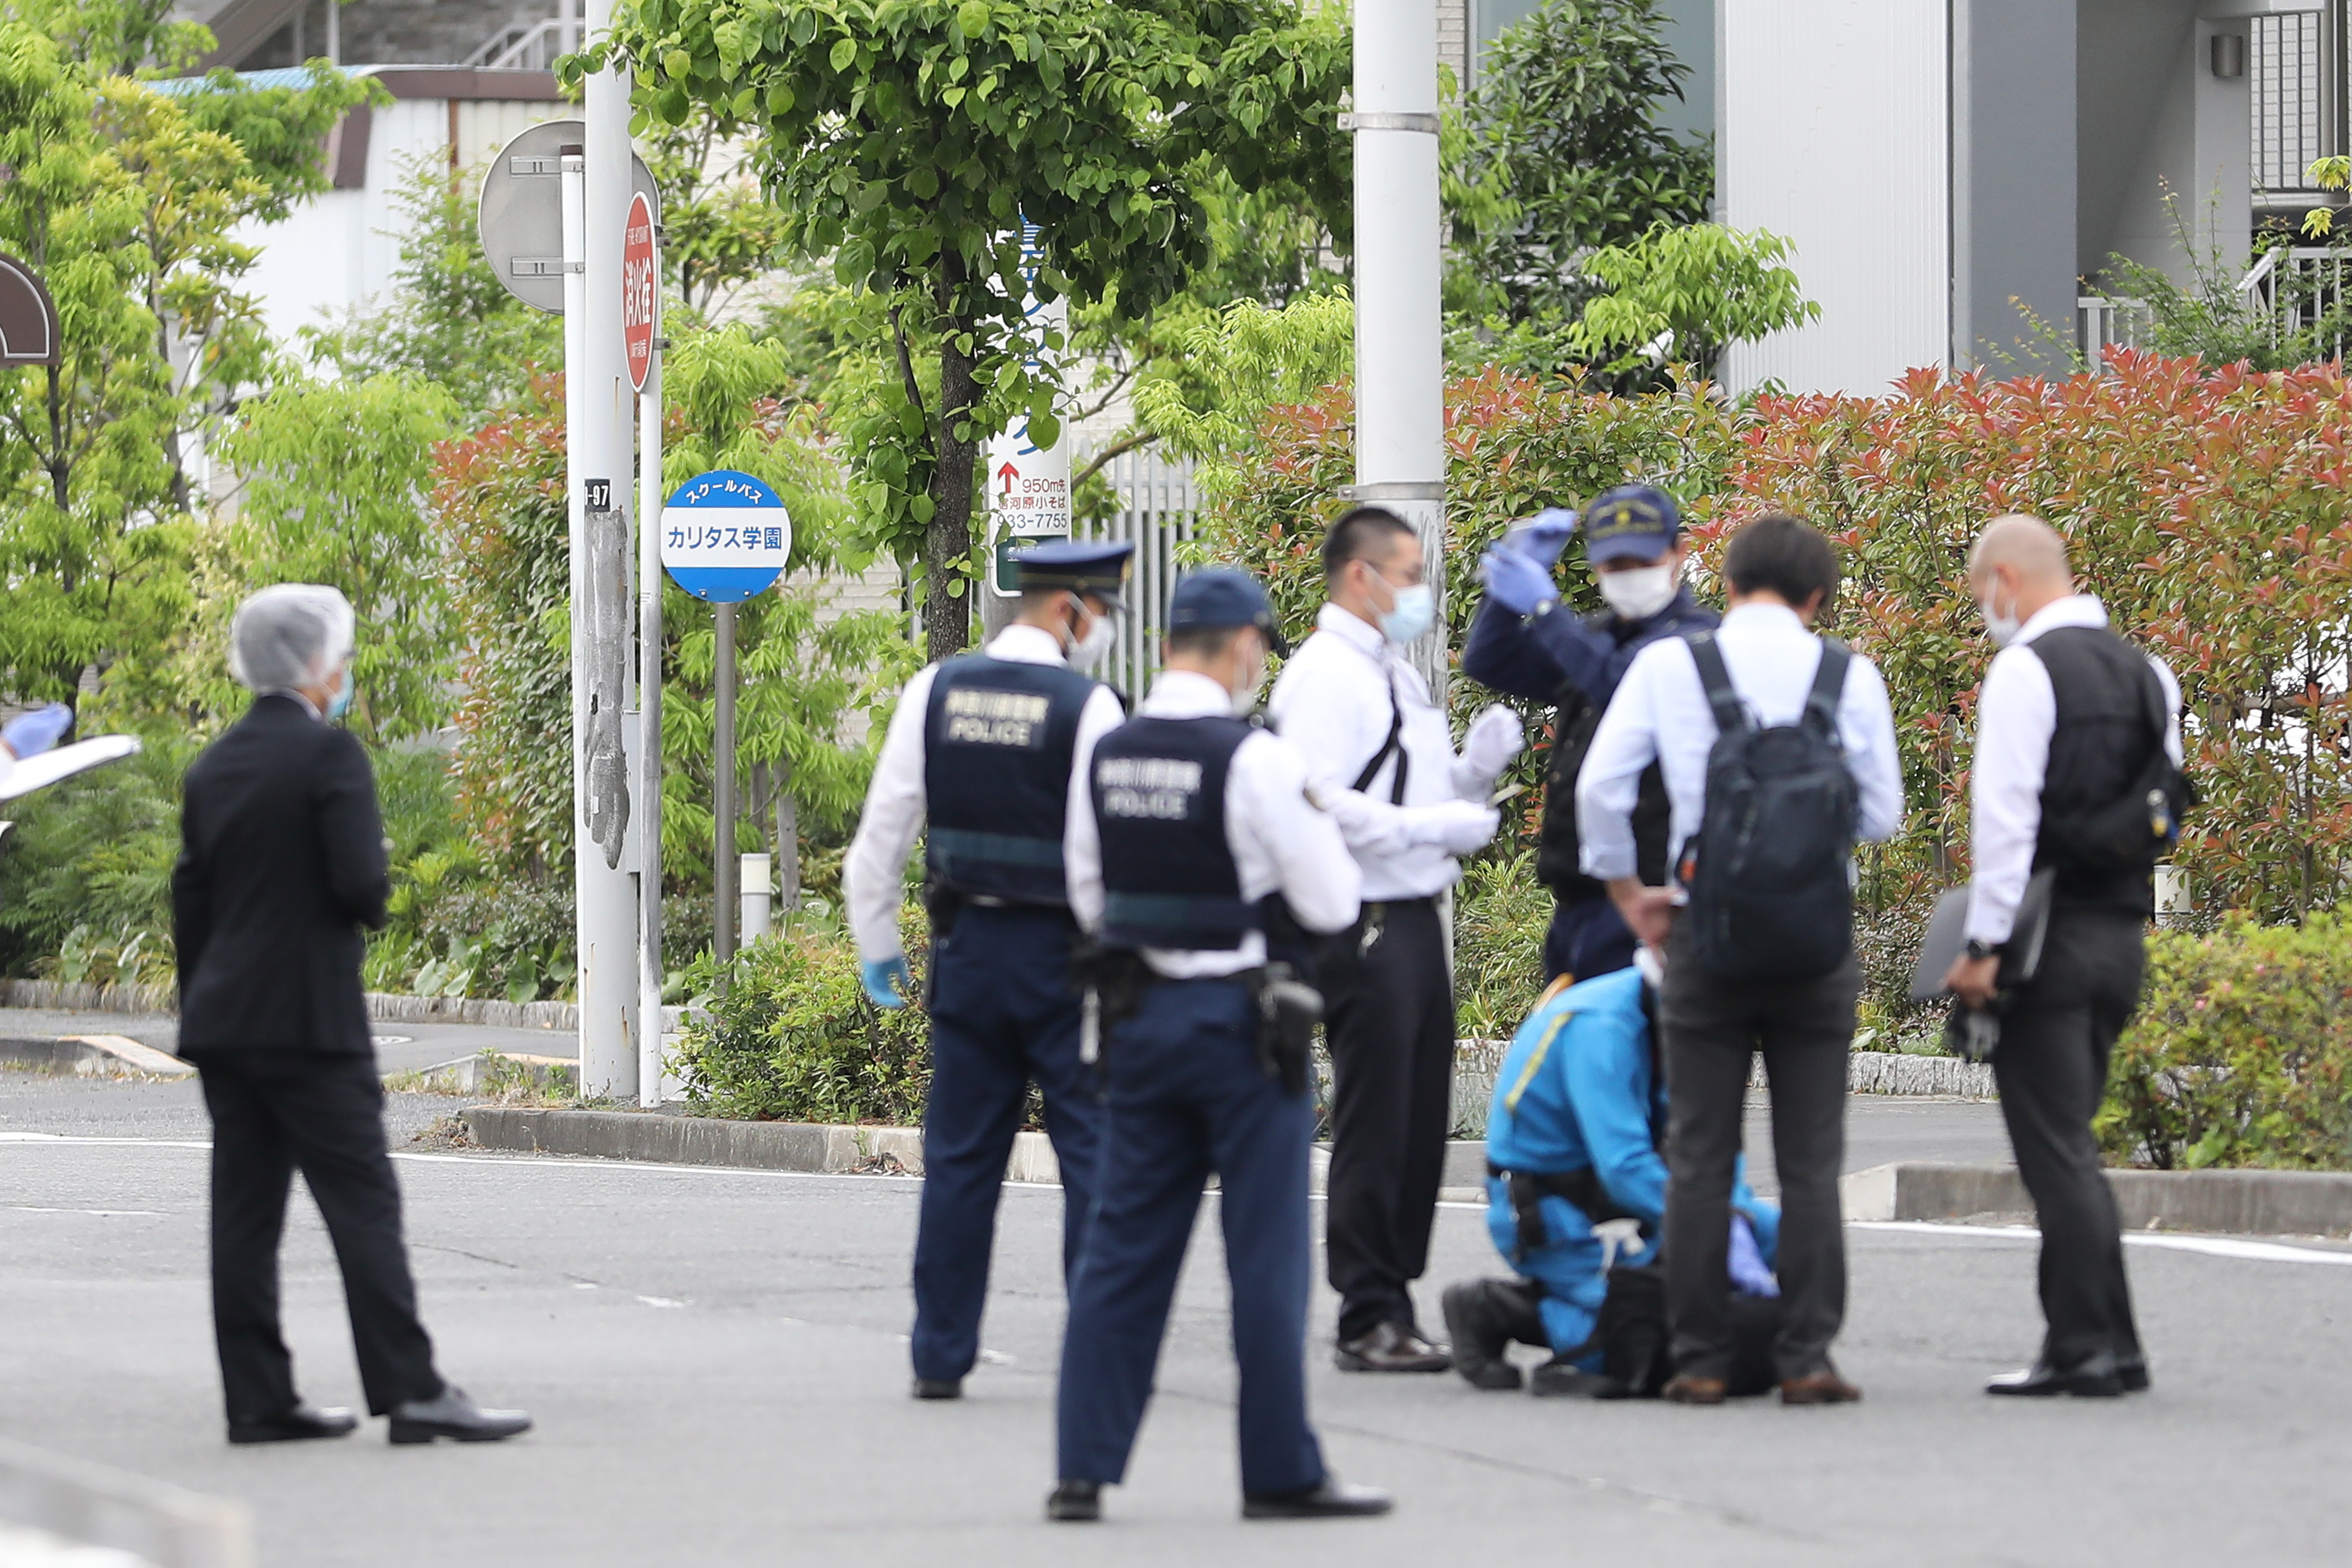  Japanese Politician's Son Arrested Over Stabbing, Shooting Attack (ld)-TeluguStop.com